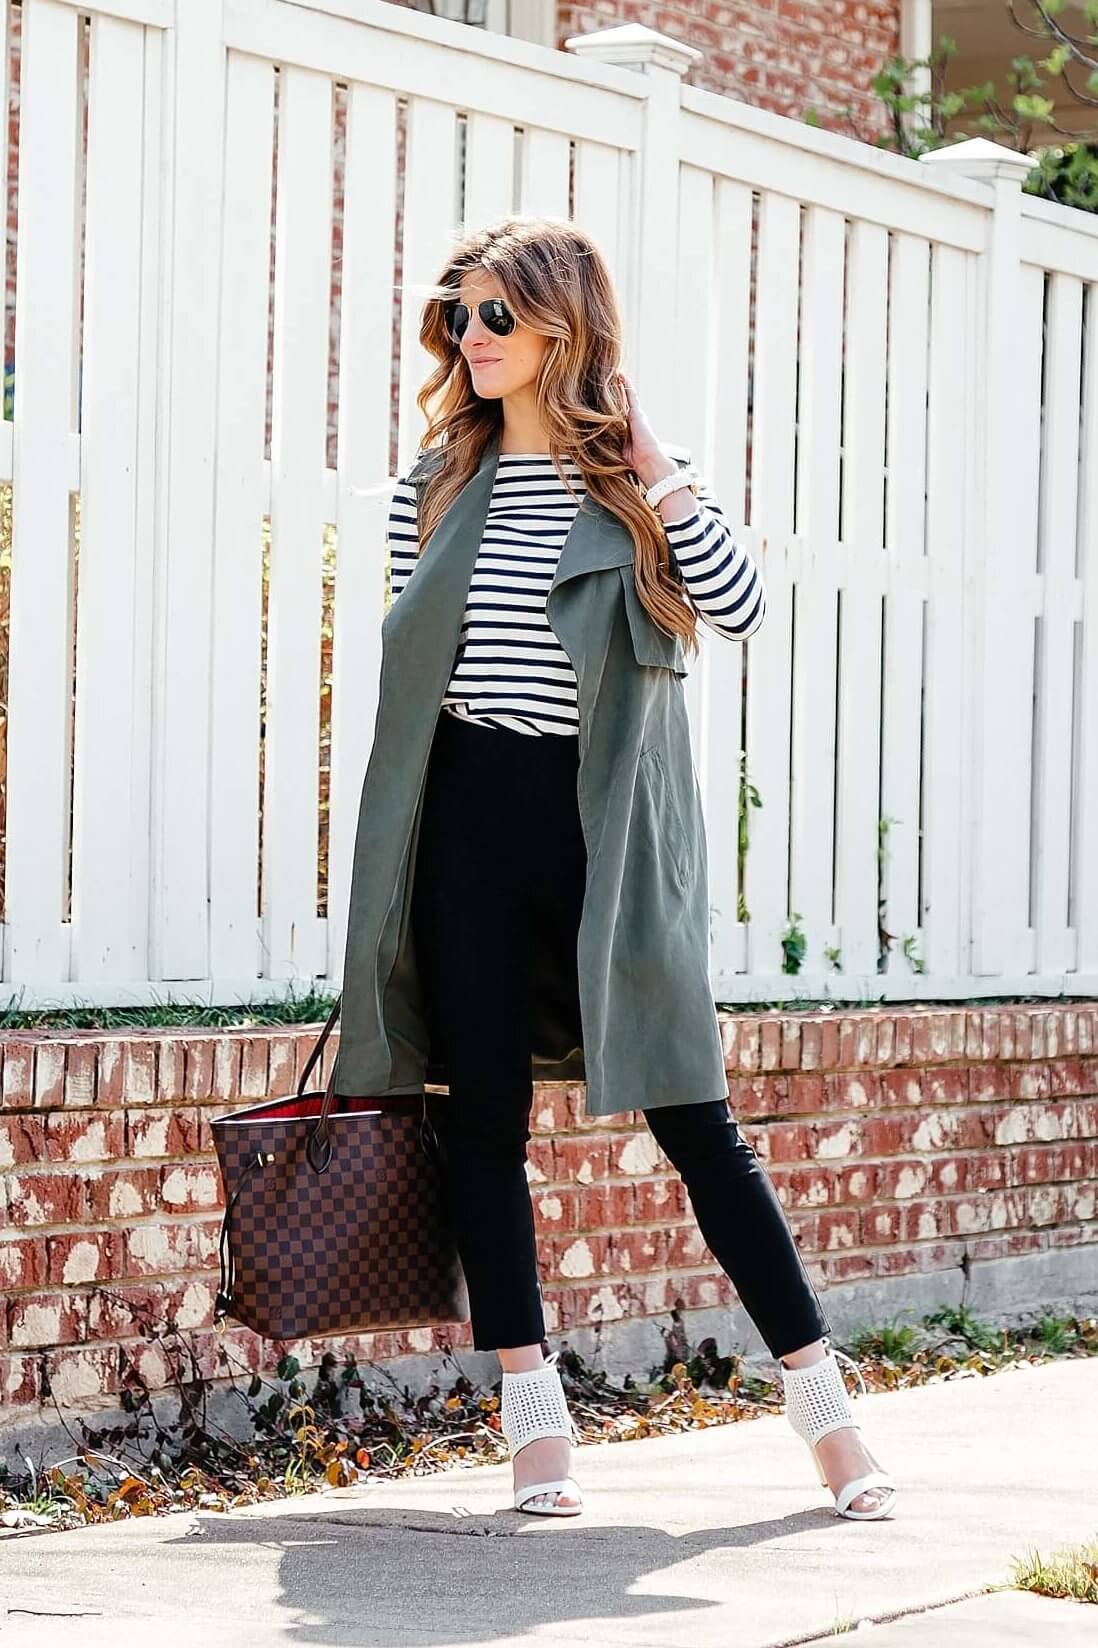 green trench vest, striped tee, black pants, business casual outfit idea, longline sleeveless jacket, black work pants outfit